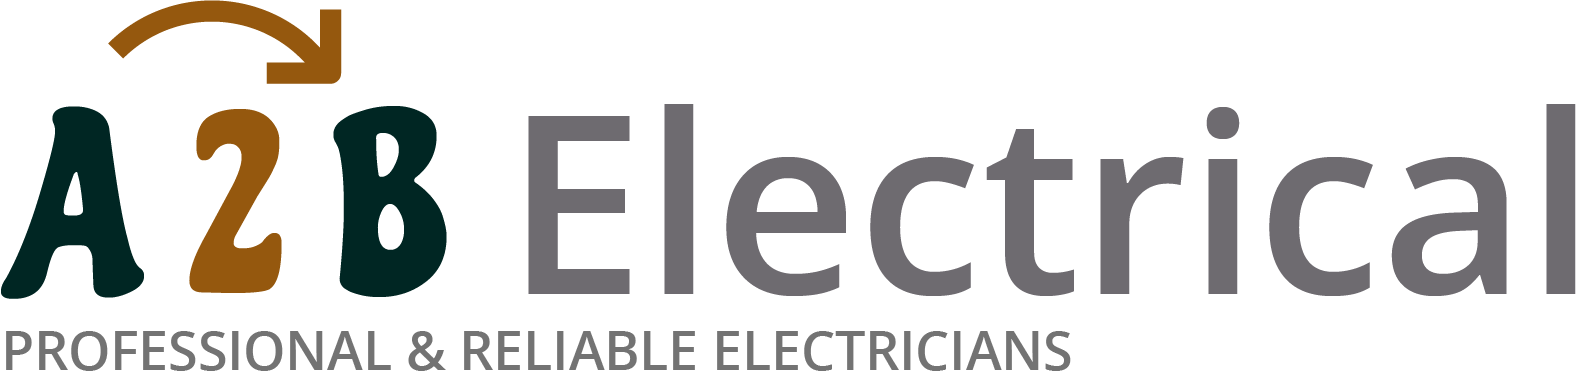 If you have electrical wiring problems in Eastleigh, we can provide an electrician to have a look for you. 